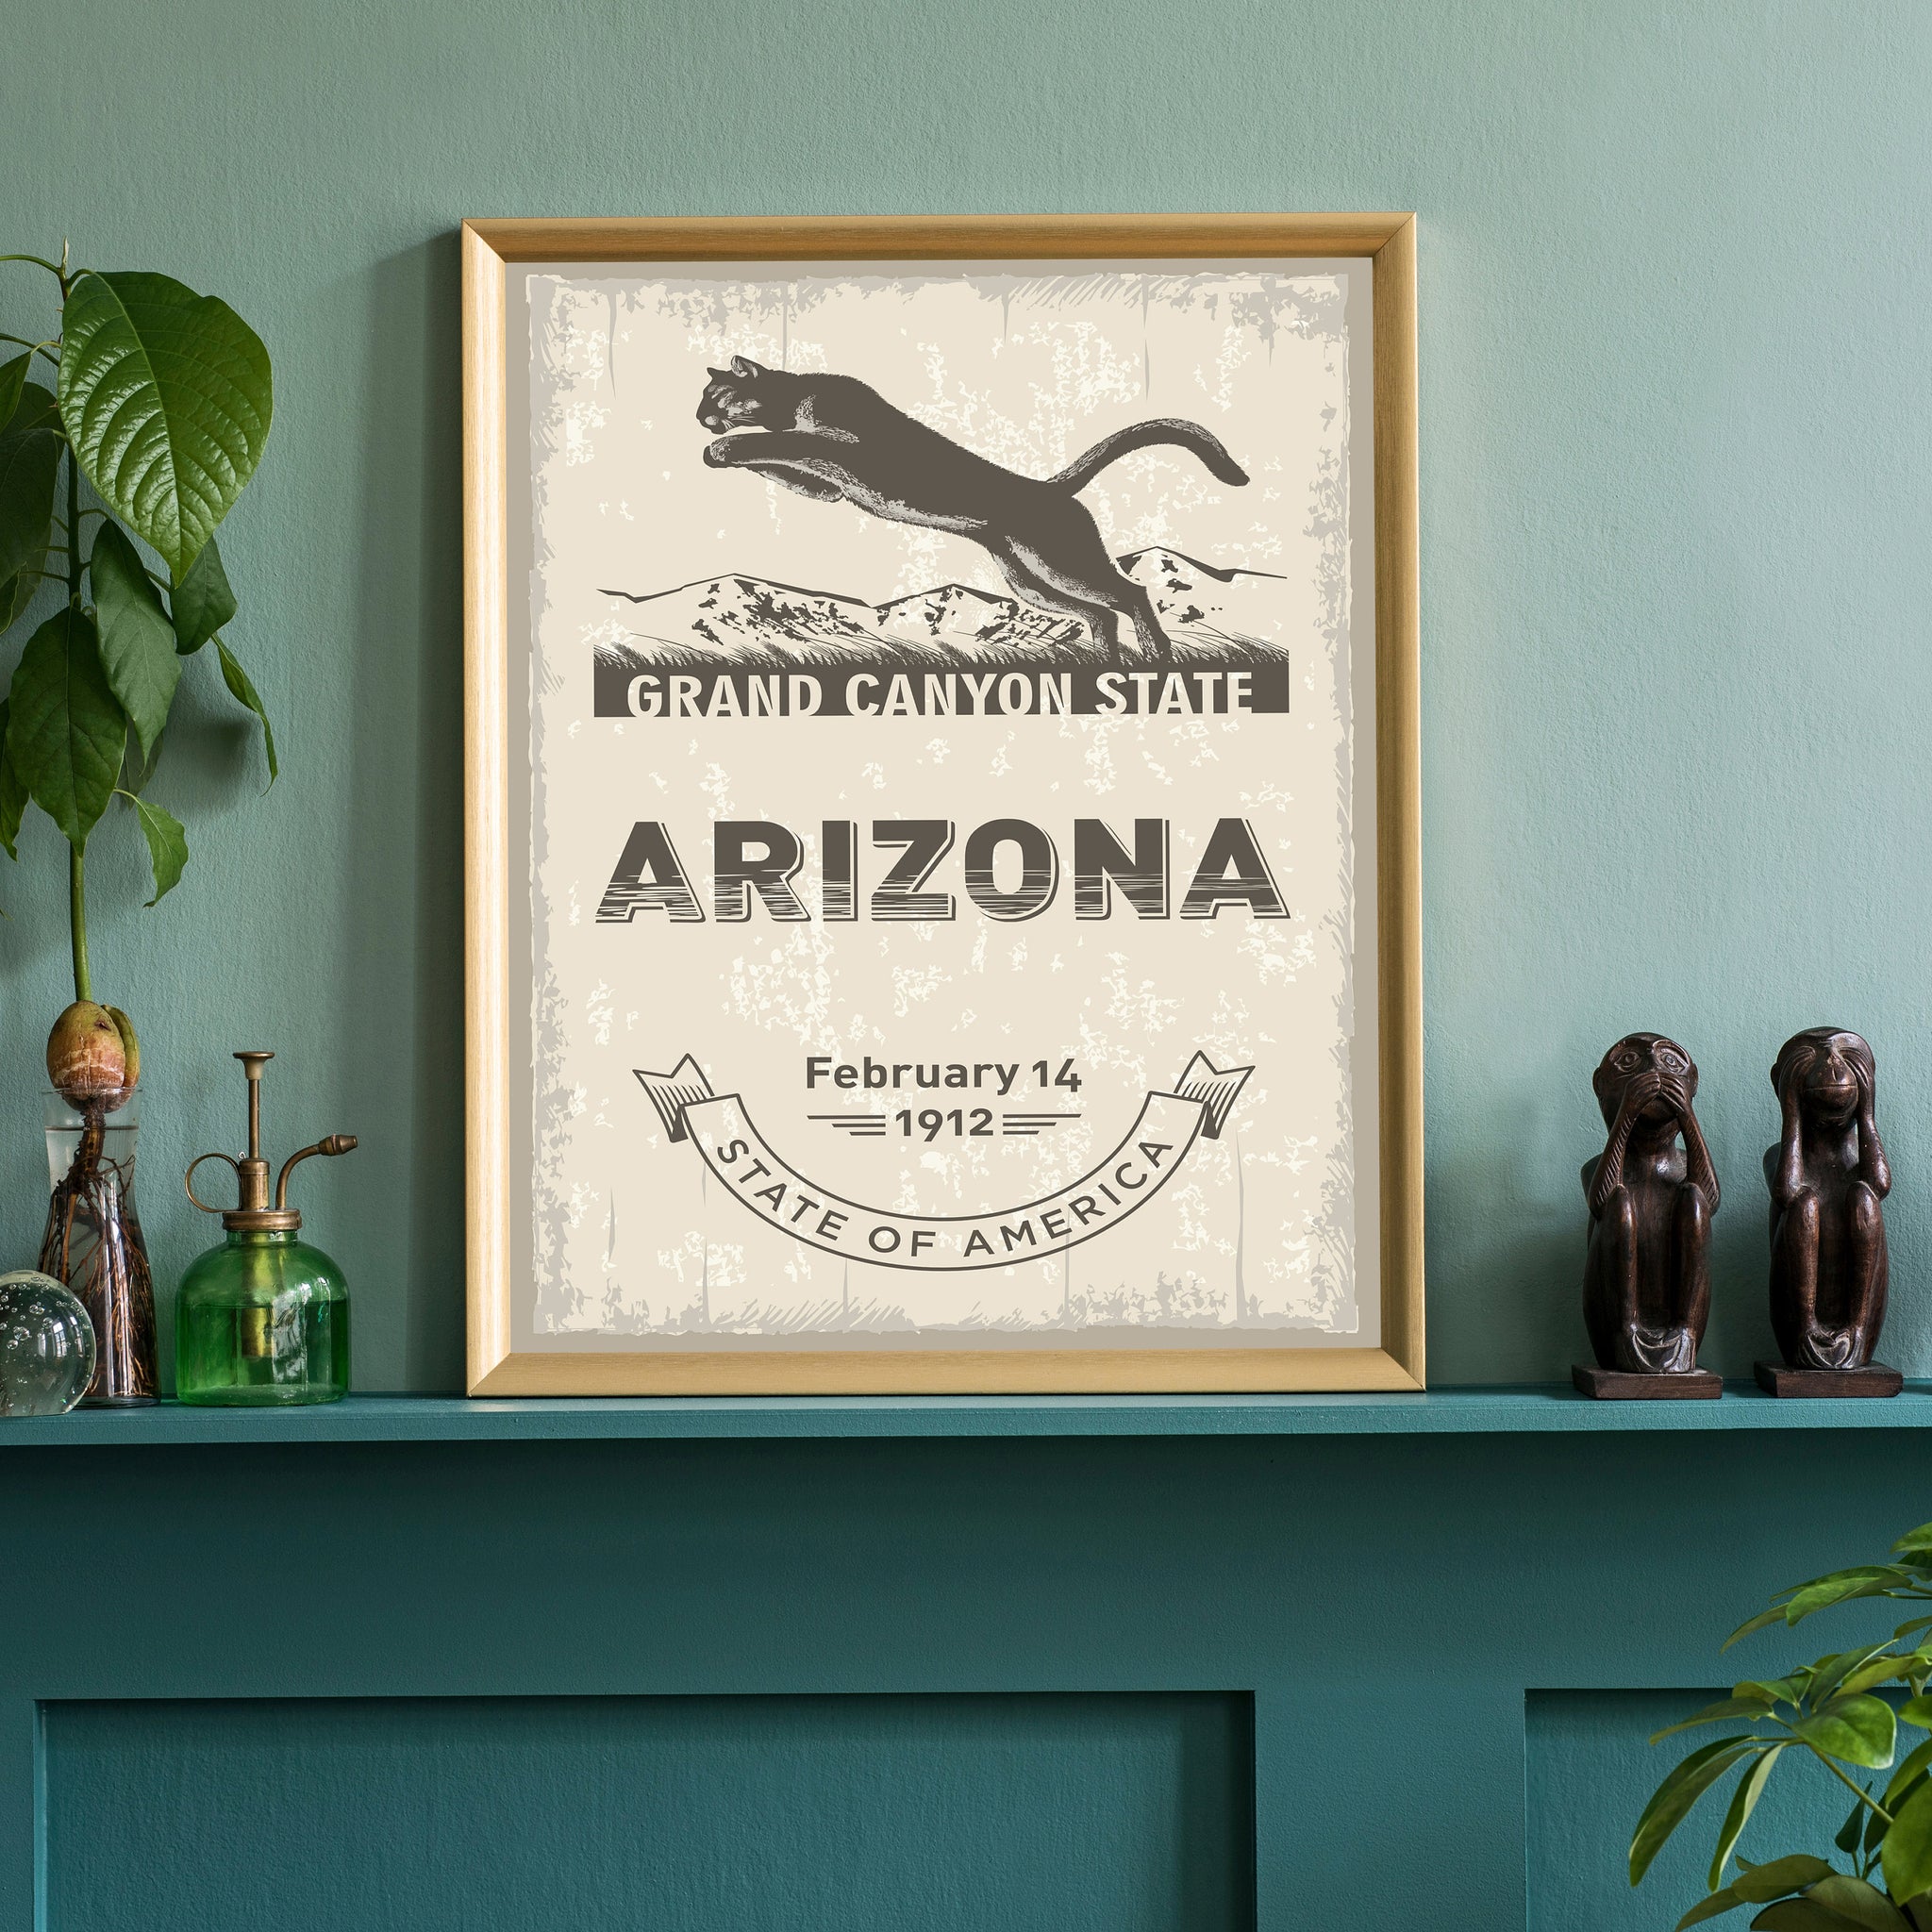 Arizona State Symbol Poster, Arizona State Poster Print, Arizona State Emblem Poster, Retro Travel State Poster, Home and Office Wall Art